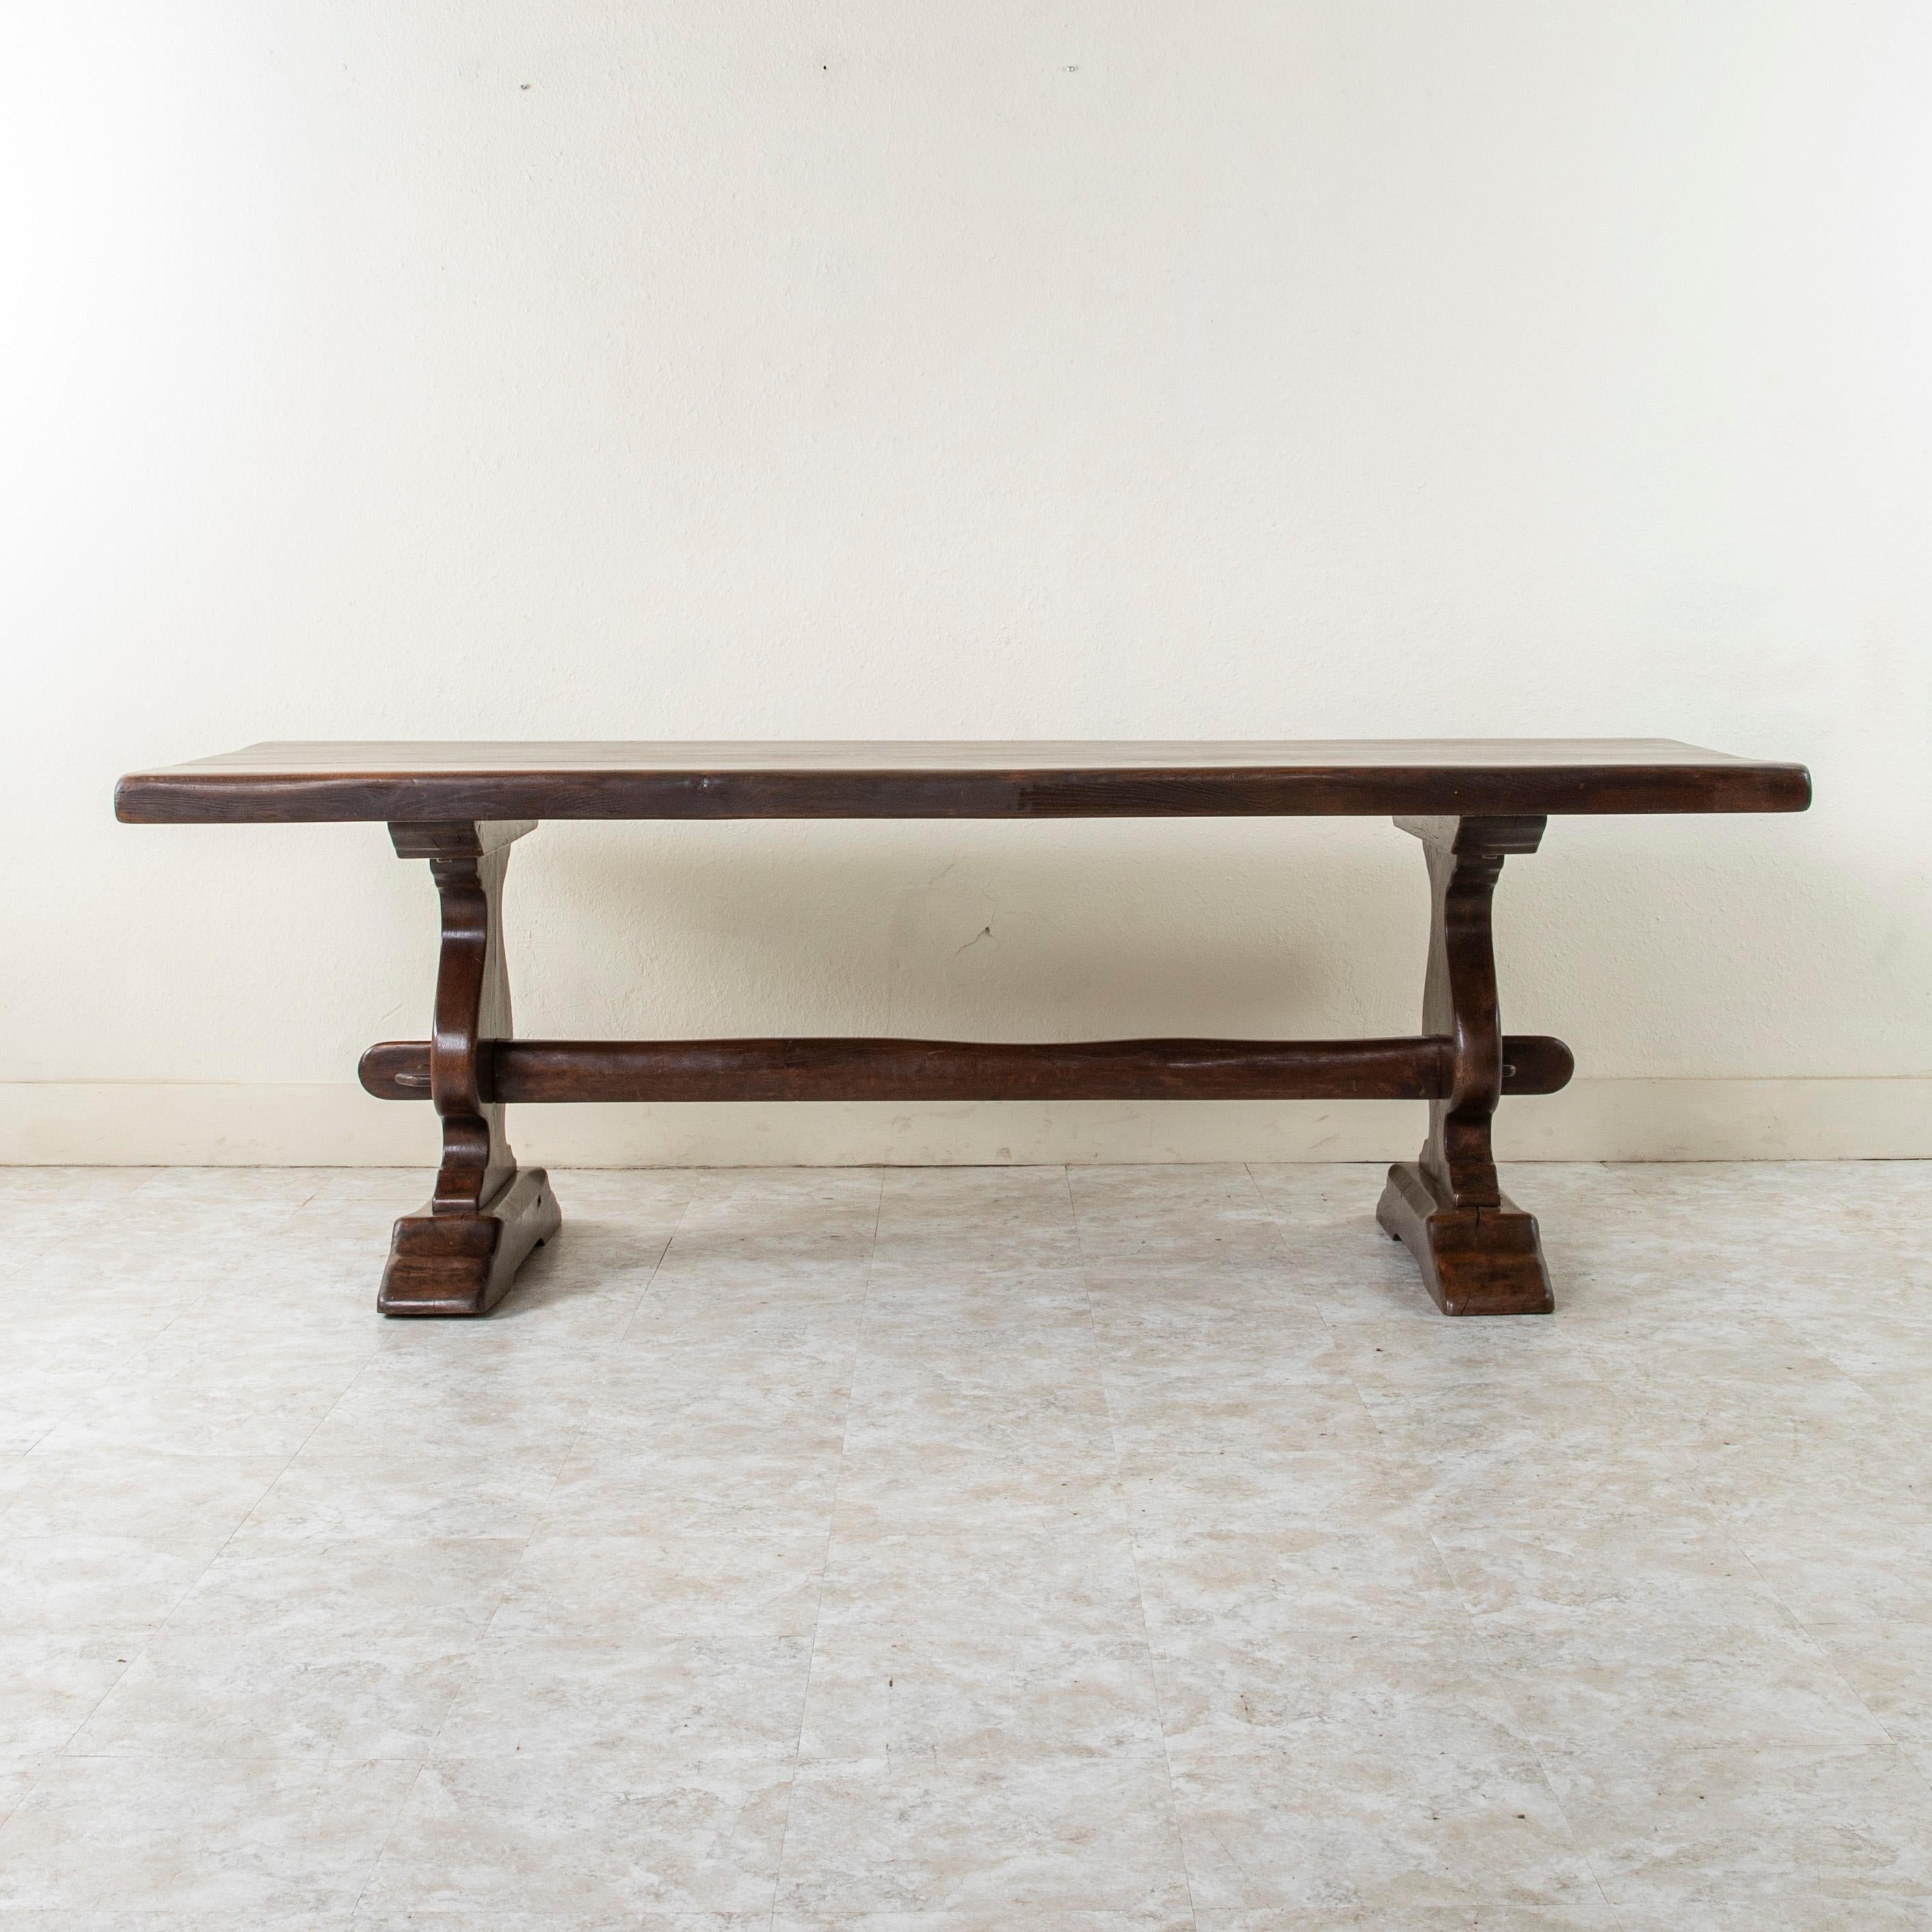 French Oak Monastery Table, Farm Table, or Dining Table Circa 1900 In Good Condition For Sale In Fayetteville, AR